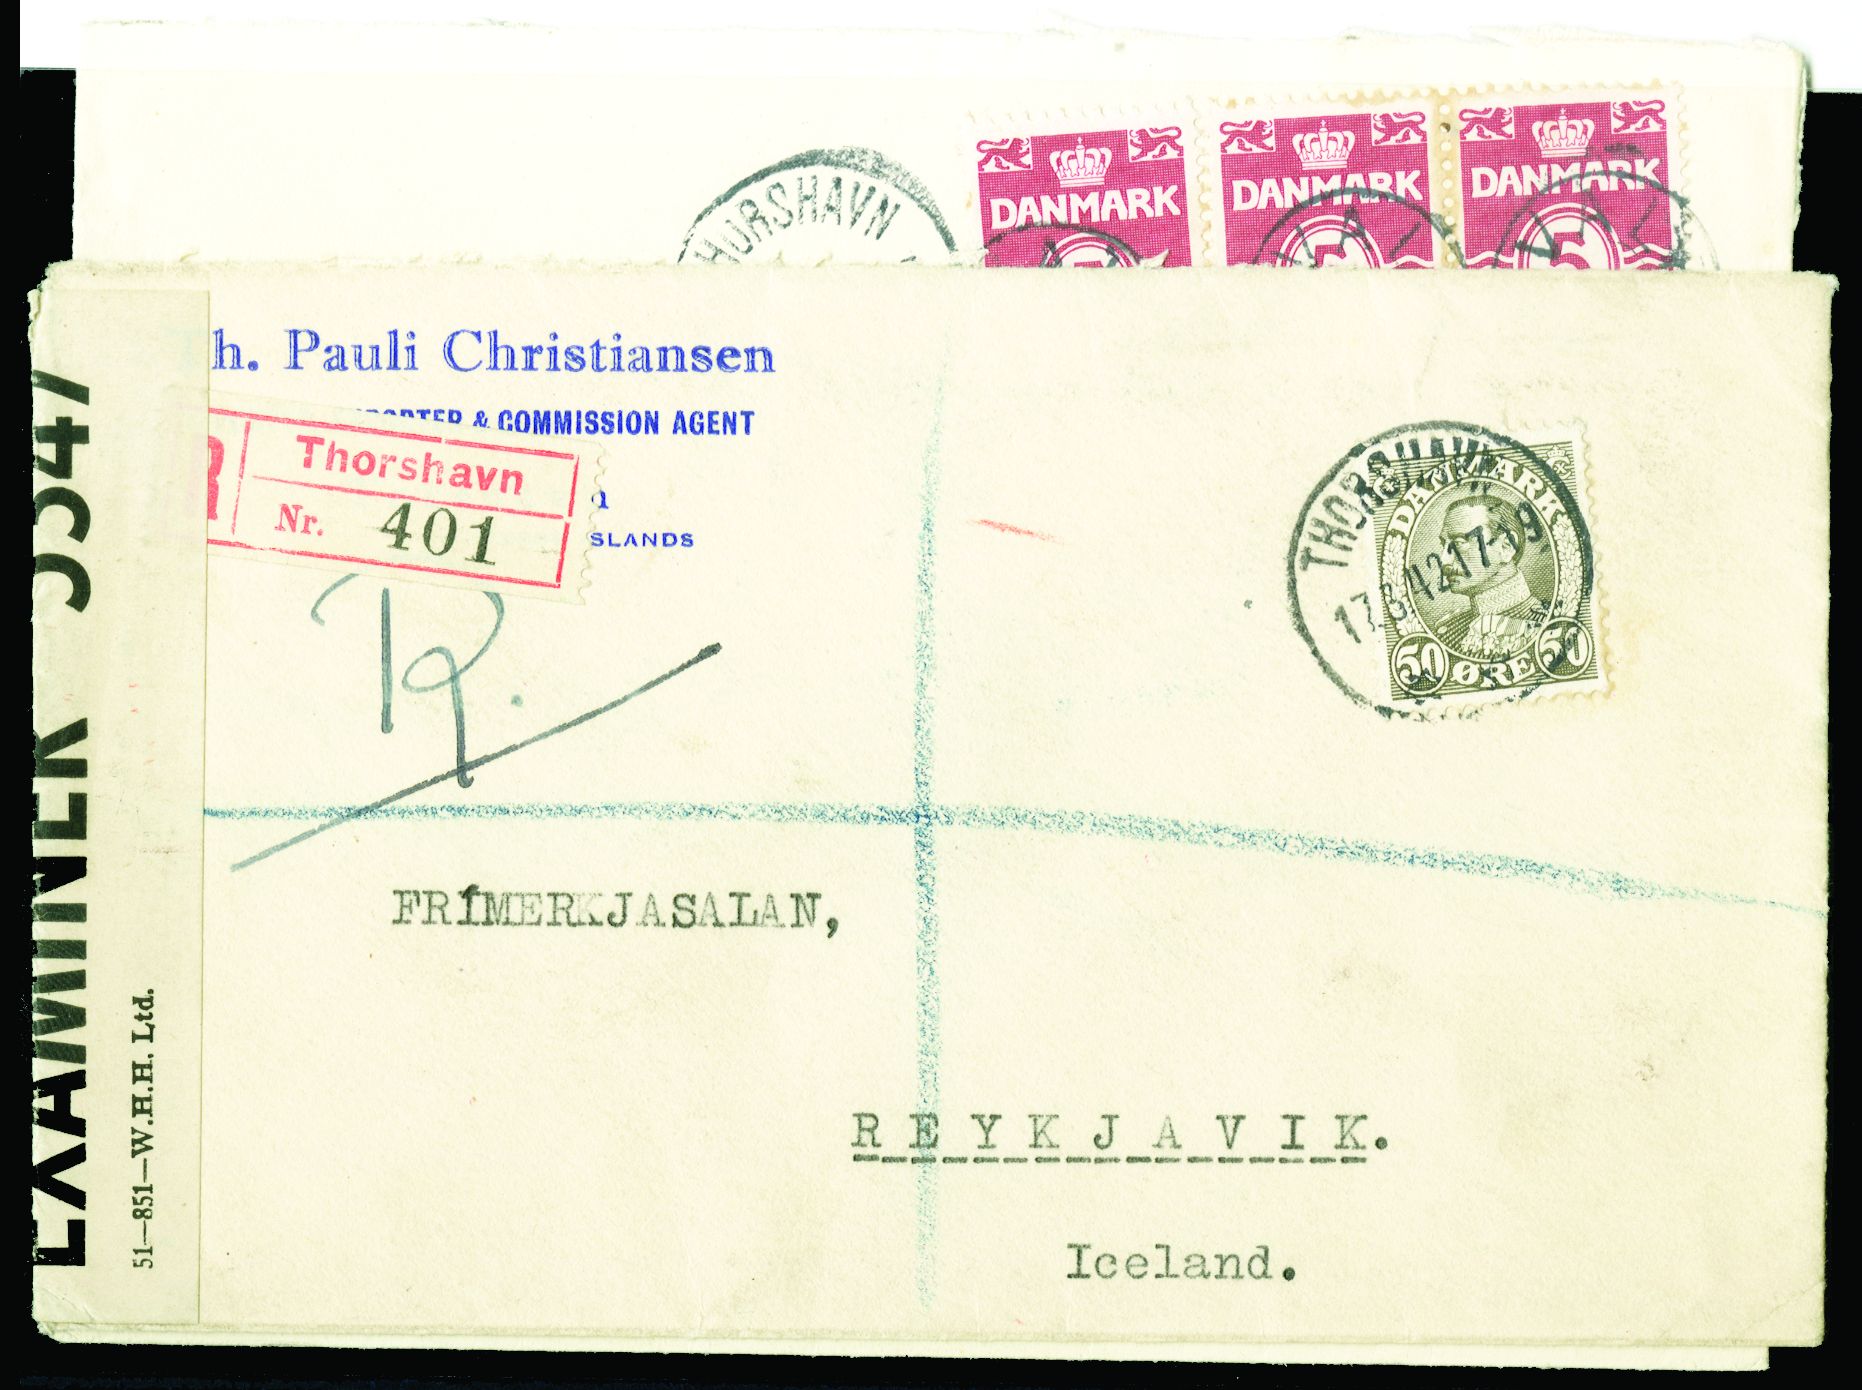 FAROES ISLANDS Denmark Used In: 1942 (17 March) reg cover from Thorshavn to Reykjavik, Iceland,